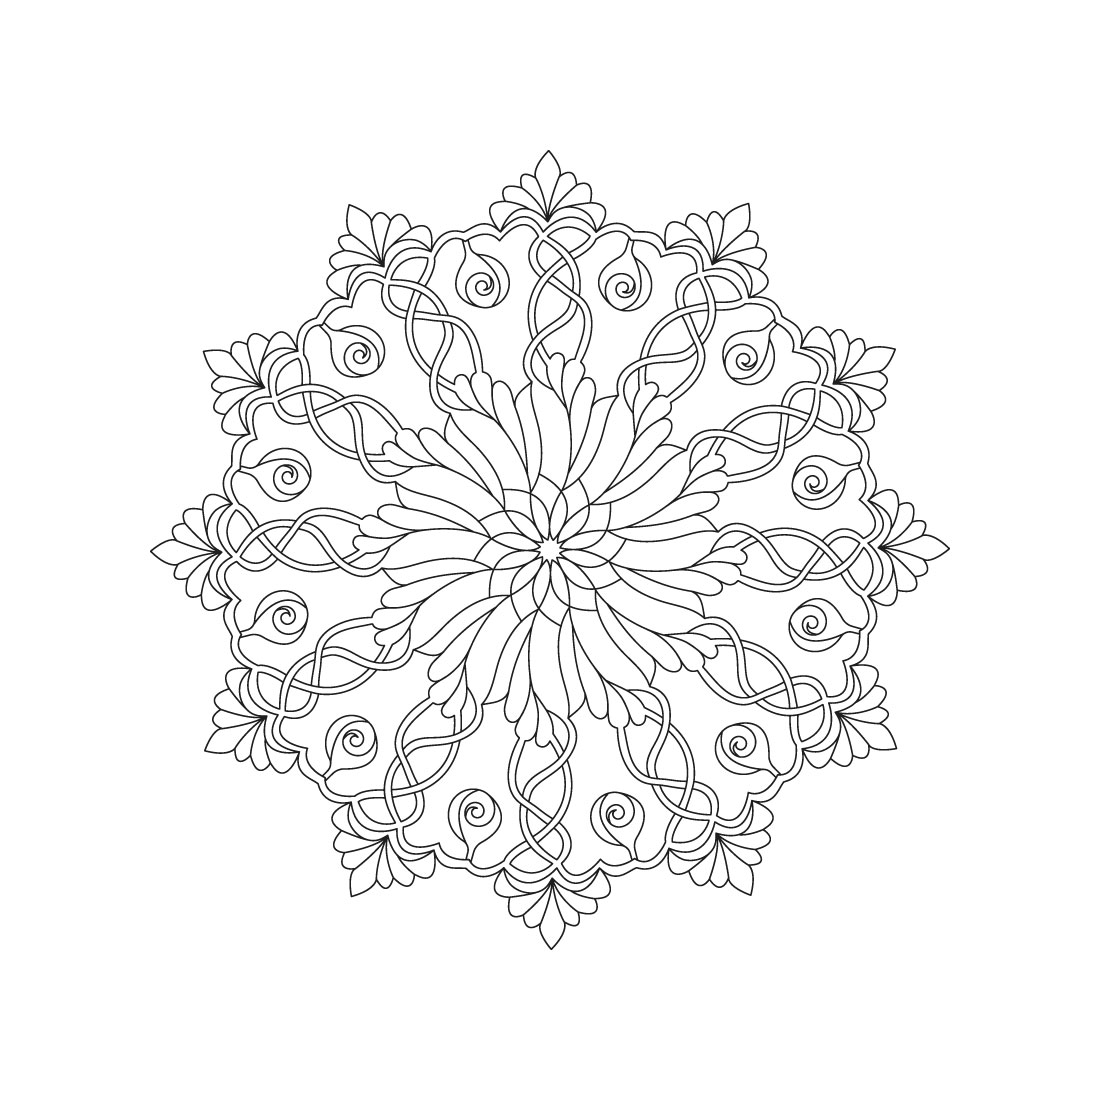 Bundle of 10 Harmony Delight Mandala Coloring Book Pages preview image.